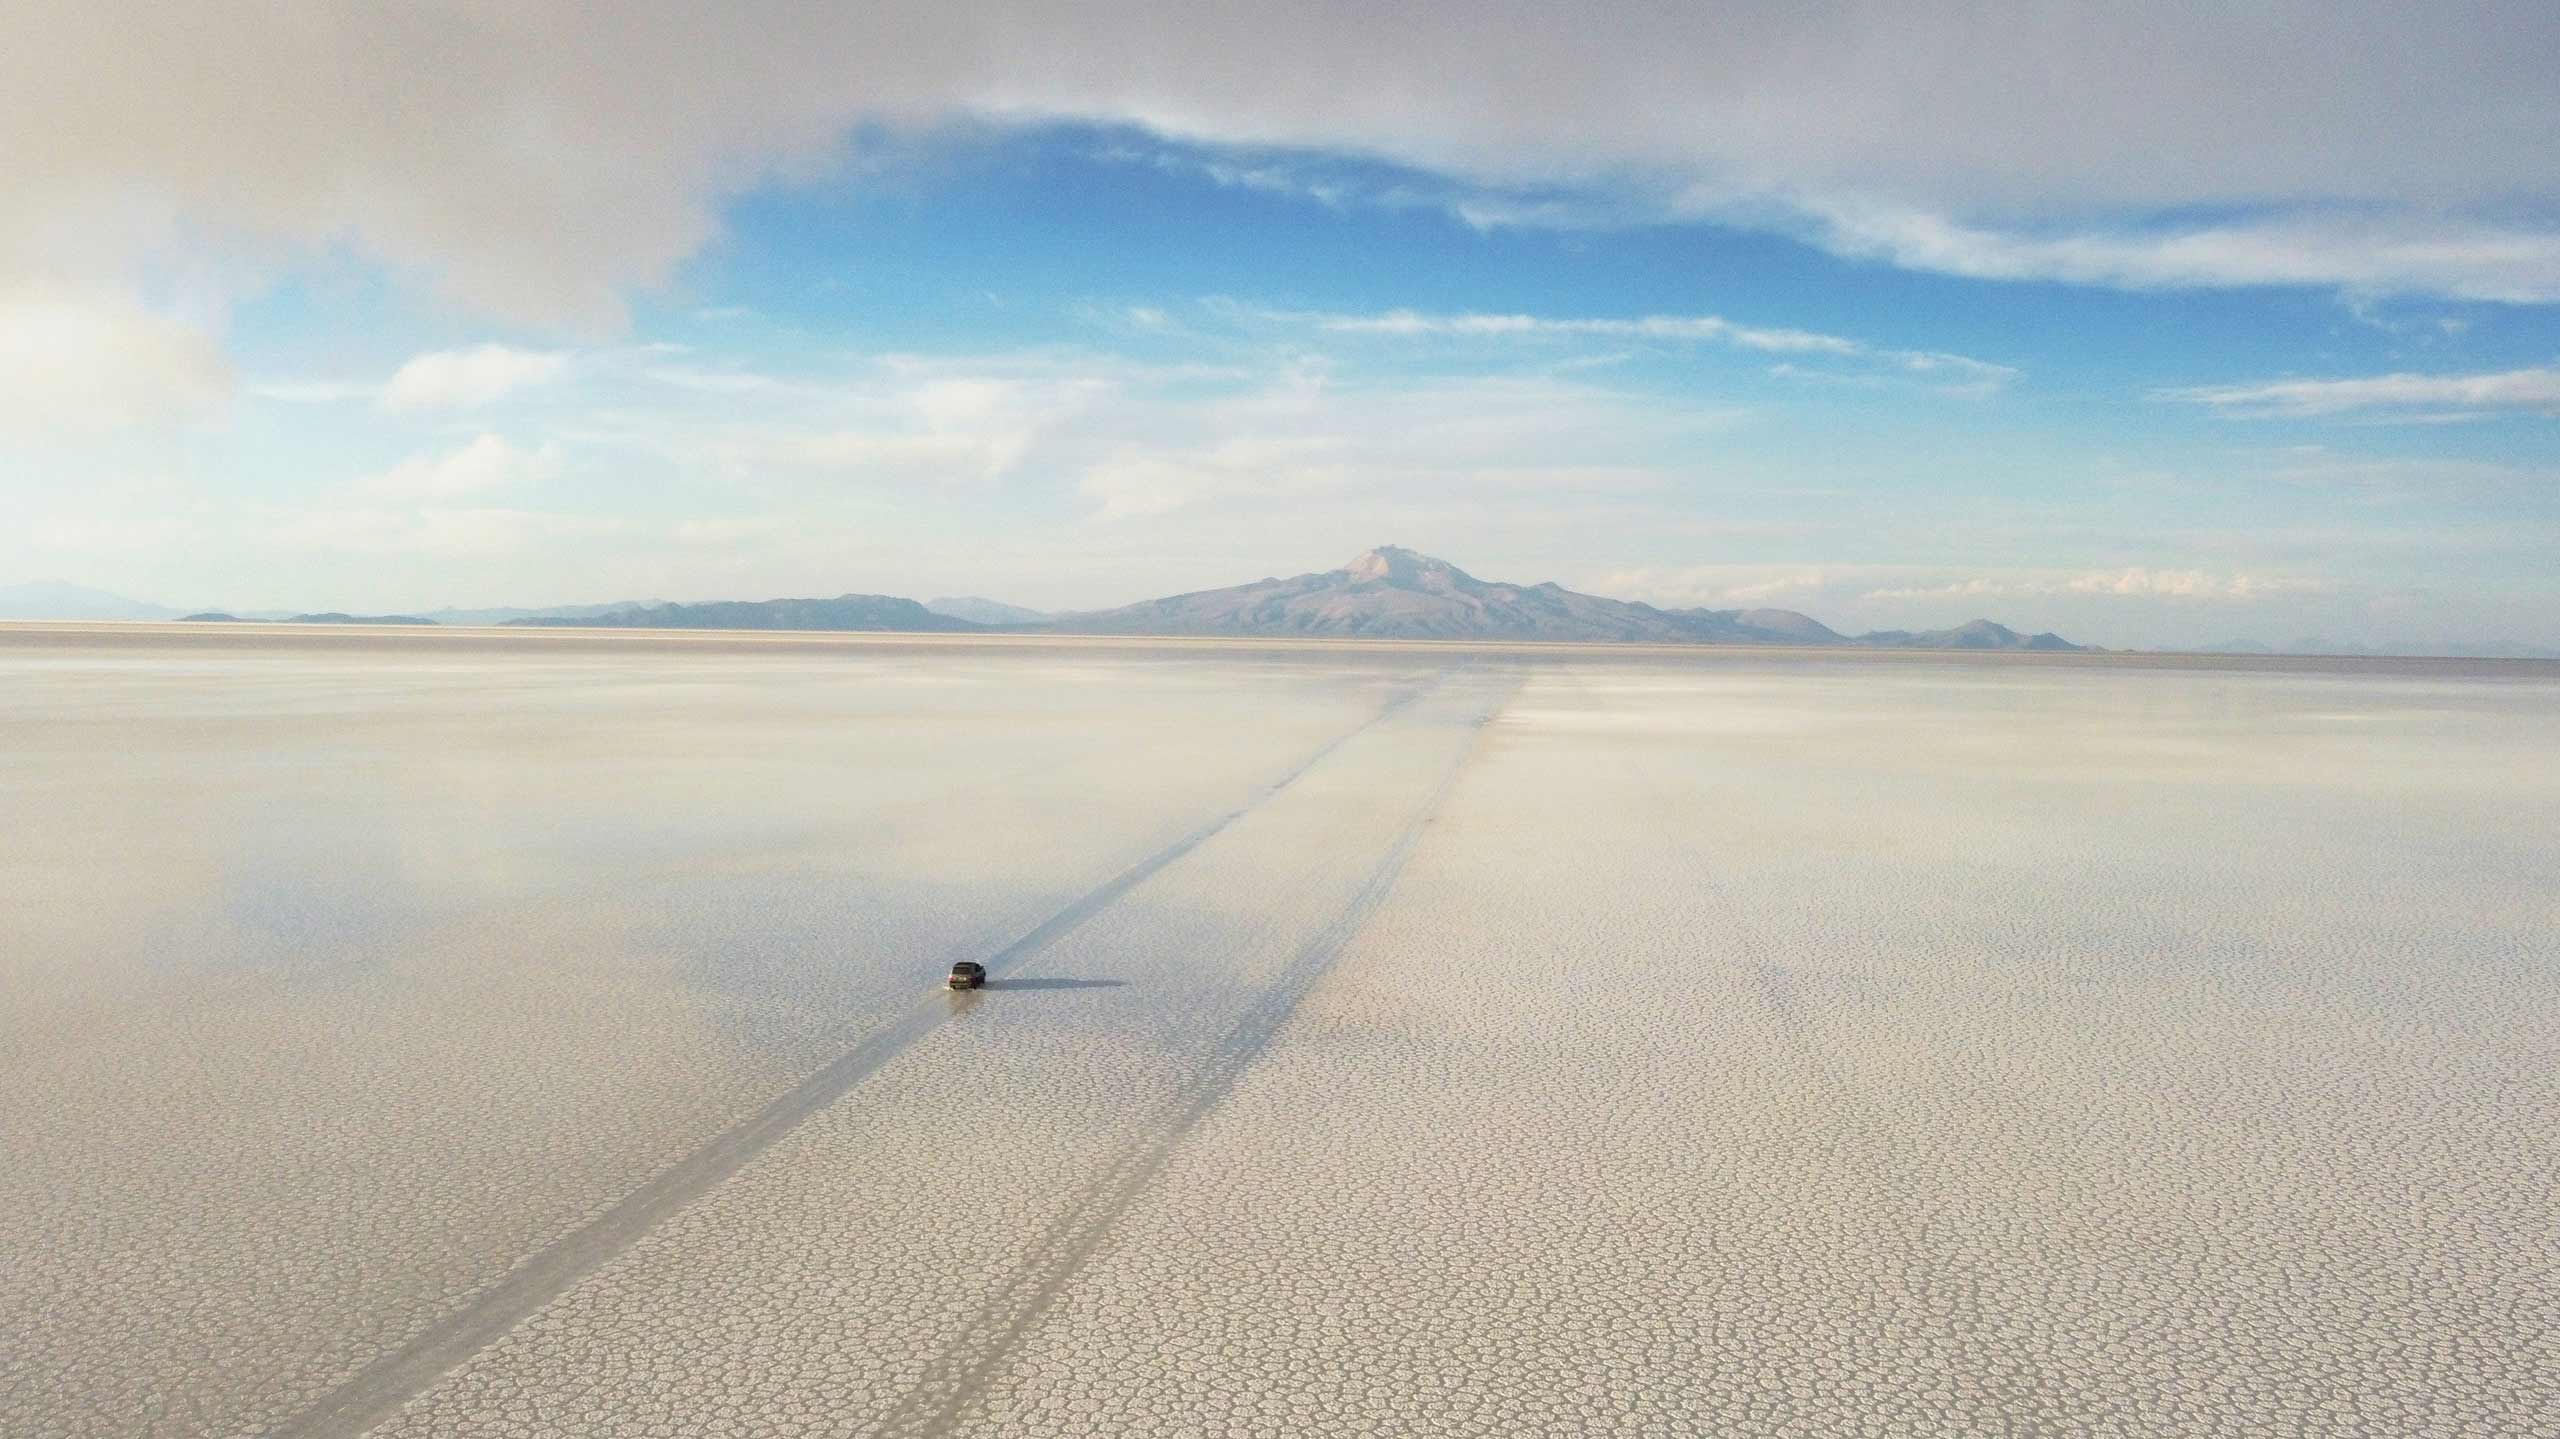 Crossing Uyini salt flats by 4x4 in Bolivia